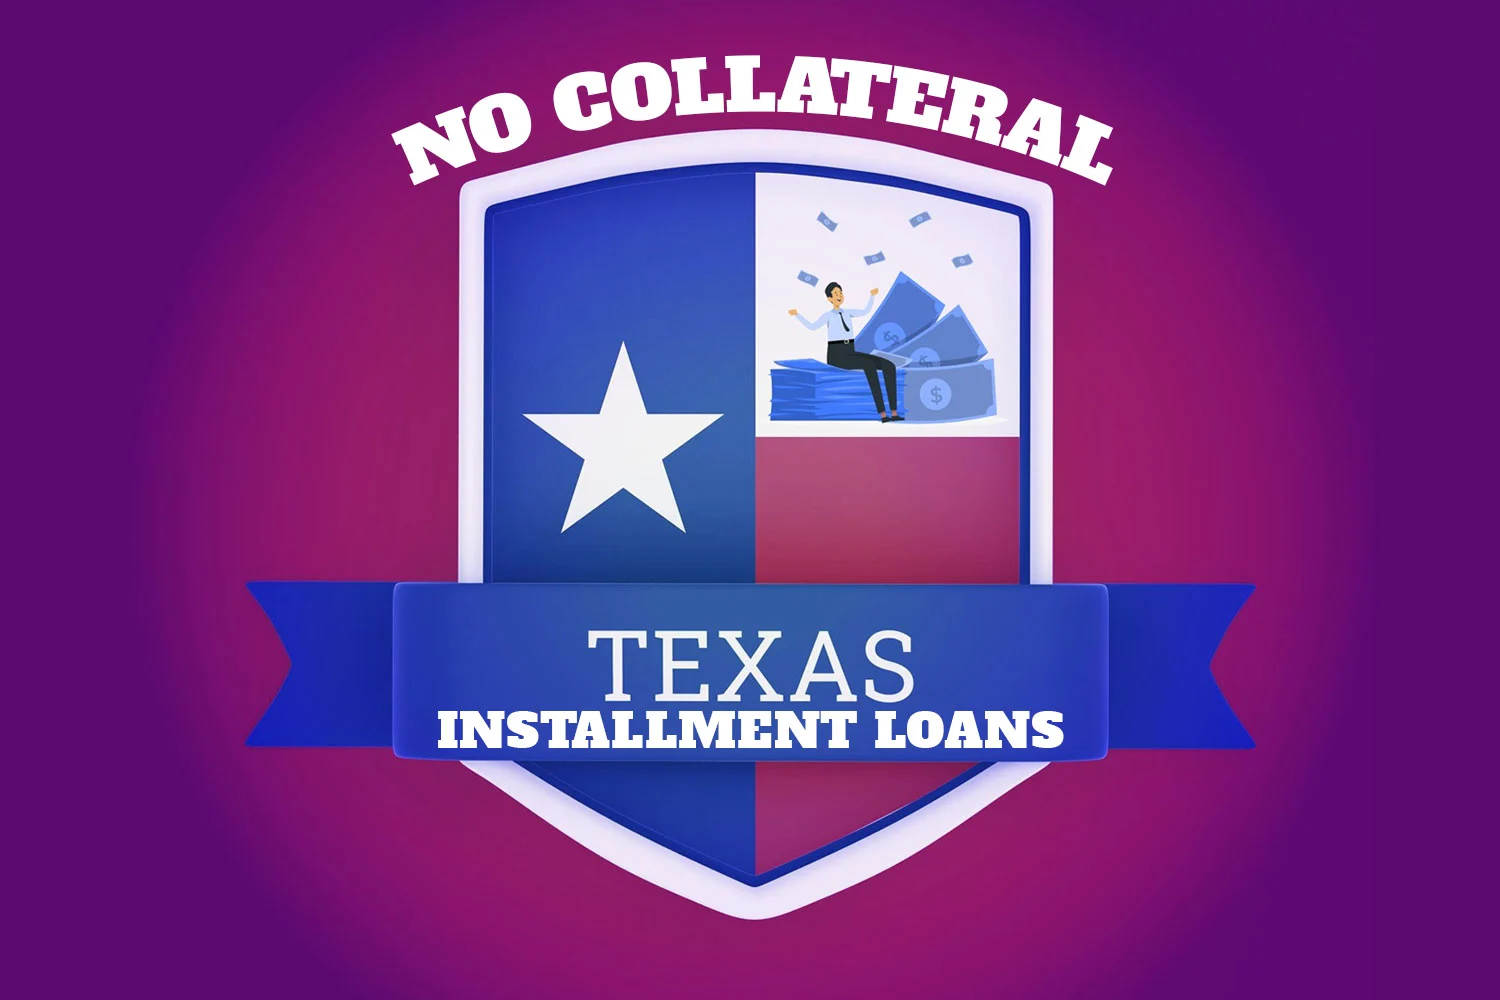 No Collateral Installment Loans in Texas